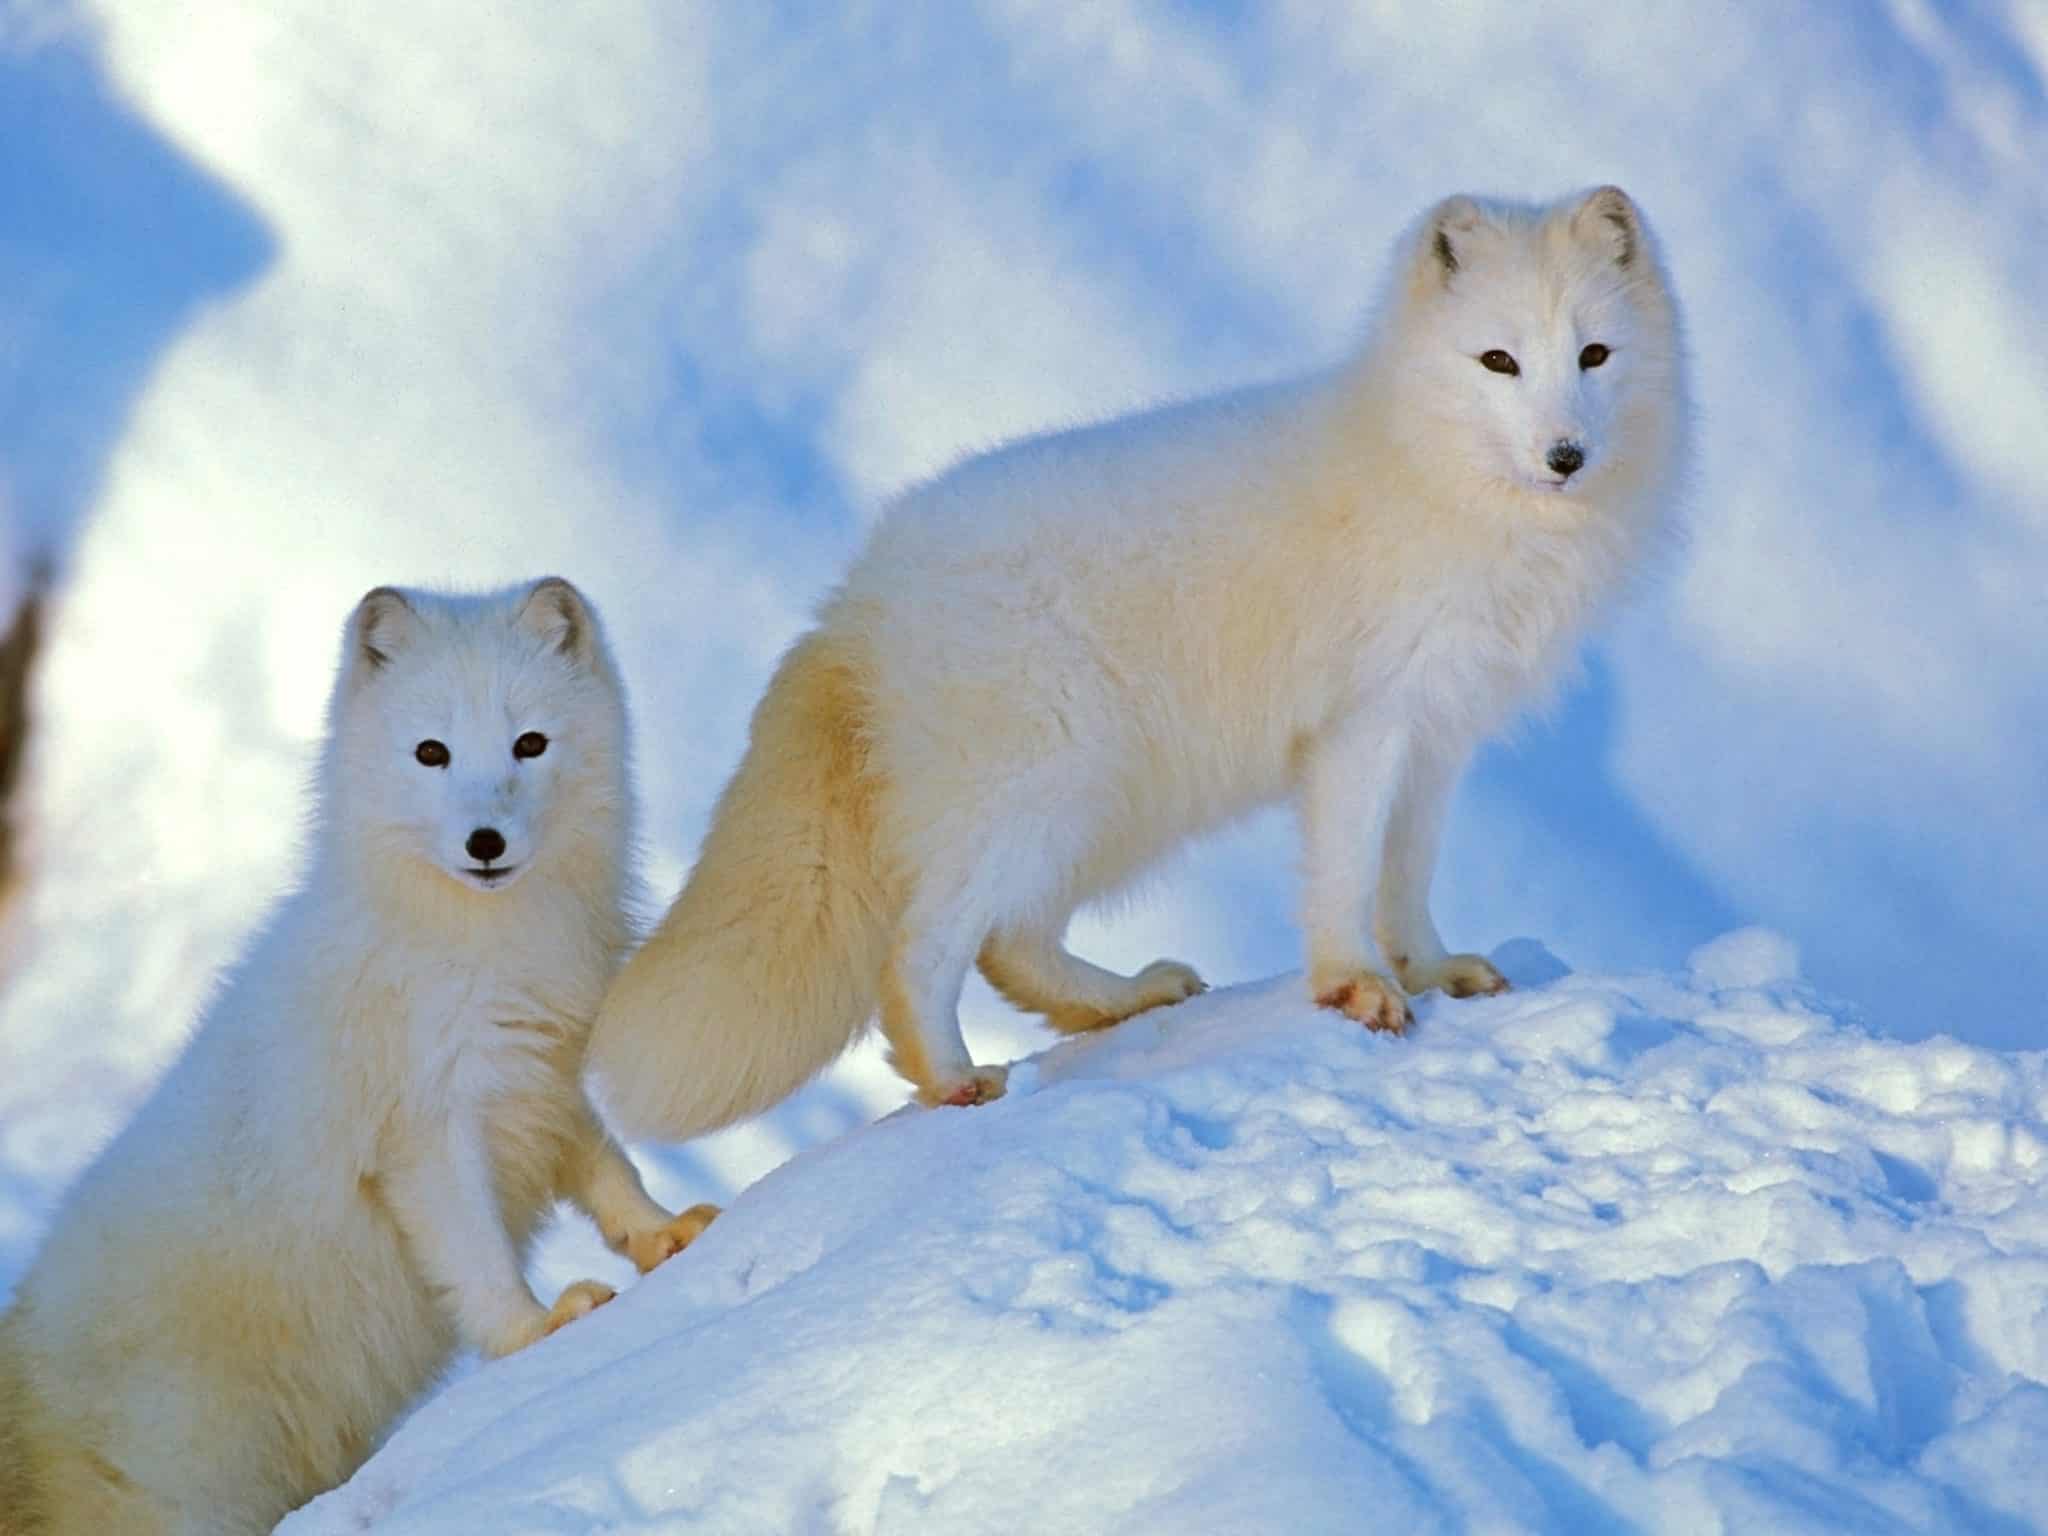 Foxes in Alaska: Types and Where They Live - A-Z Animals